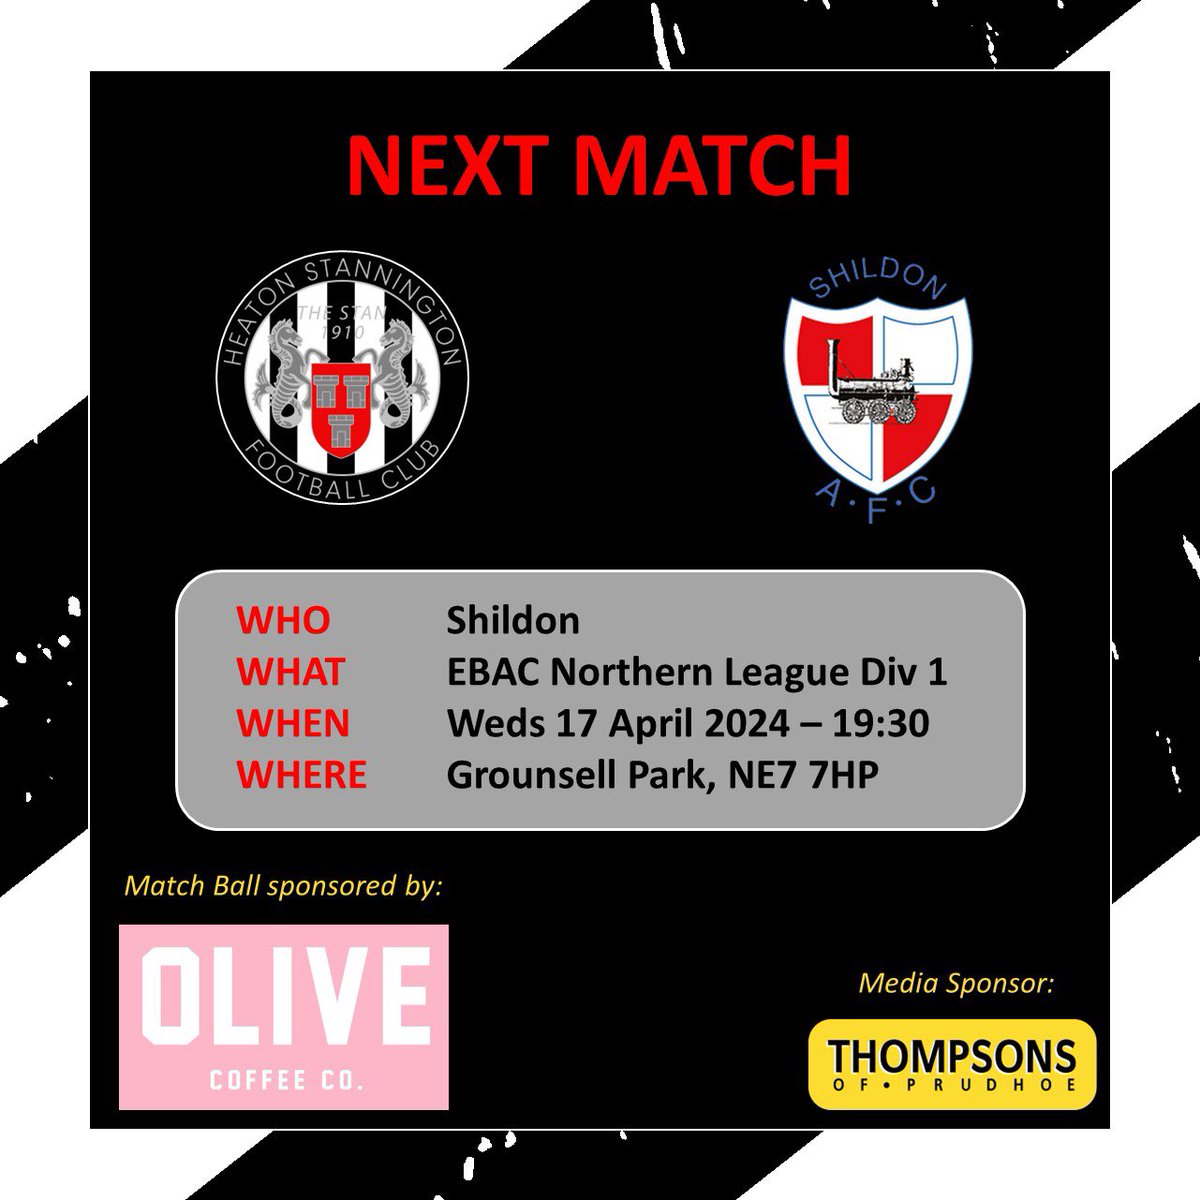 MATCH DAY Join us this evening as we take on league leaders, Shildon. It doesn’t get much tougher a test than this! Adults £7, Over 65s £4 and kids free. Gates open from 6pm, don’t leave it late to arrive! ⚫️⚪️